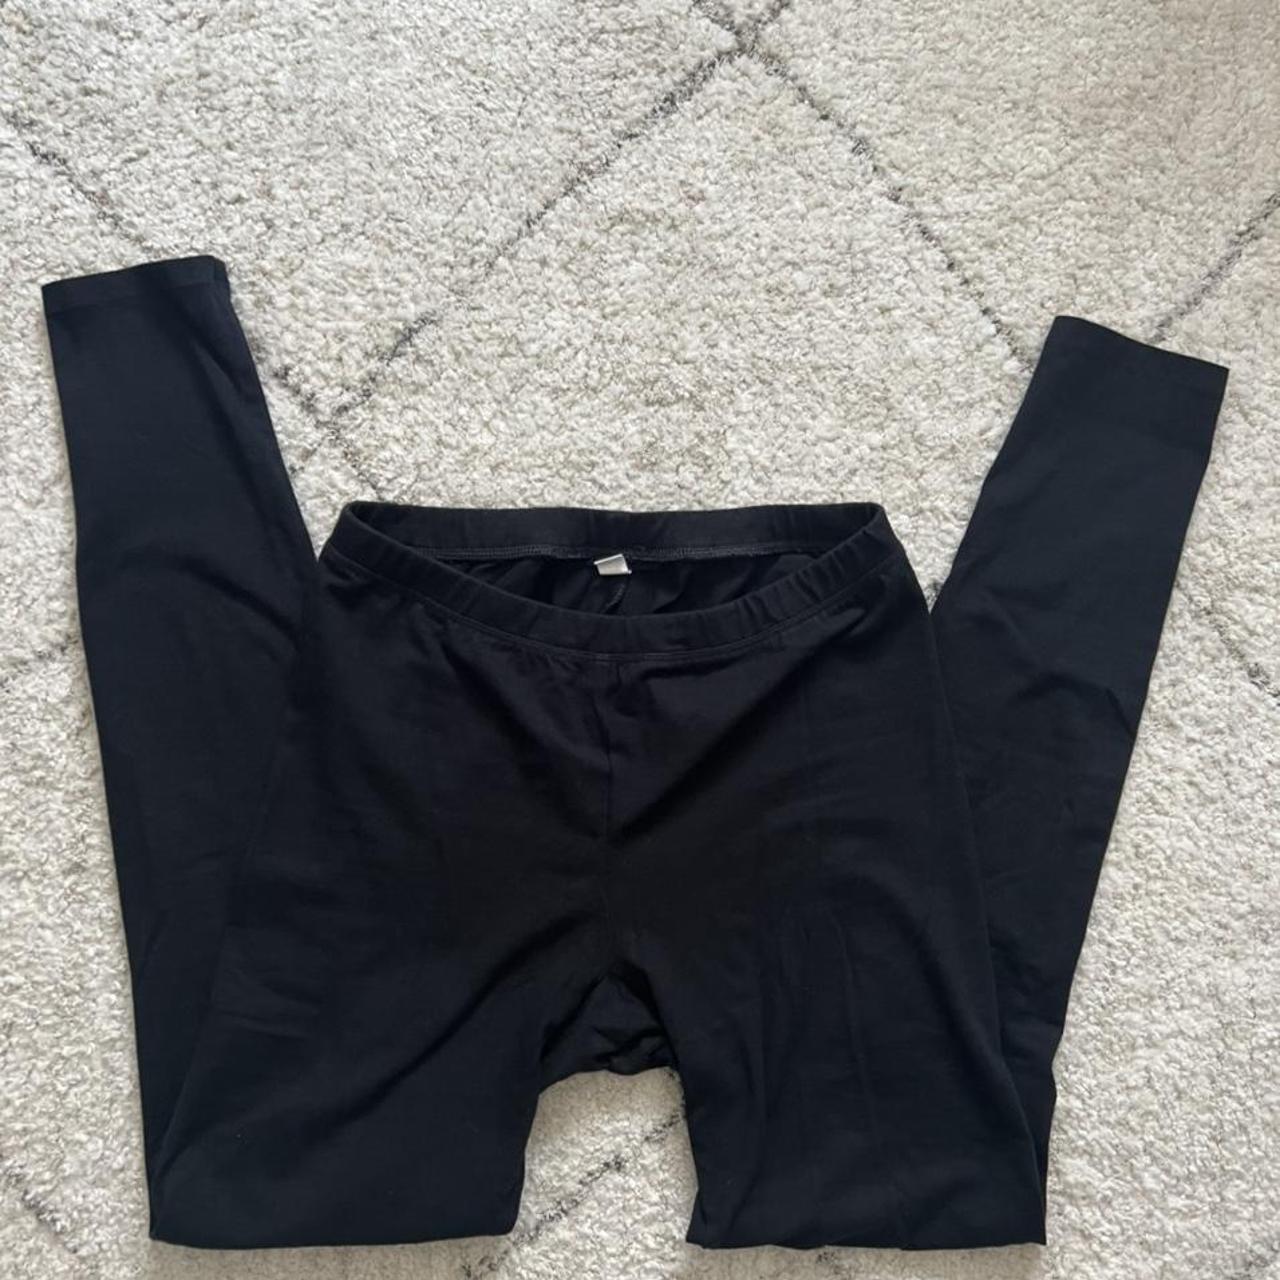 Product Image 1 - Causal black leggings
For Workout or